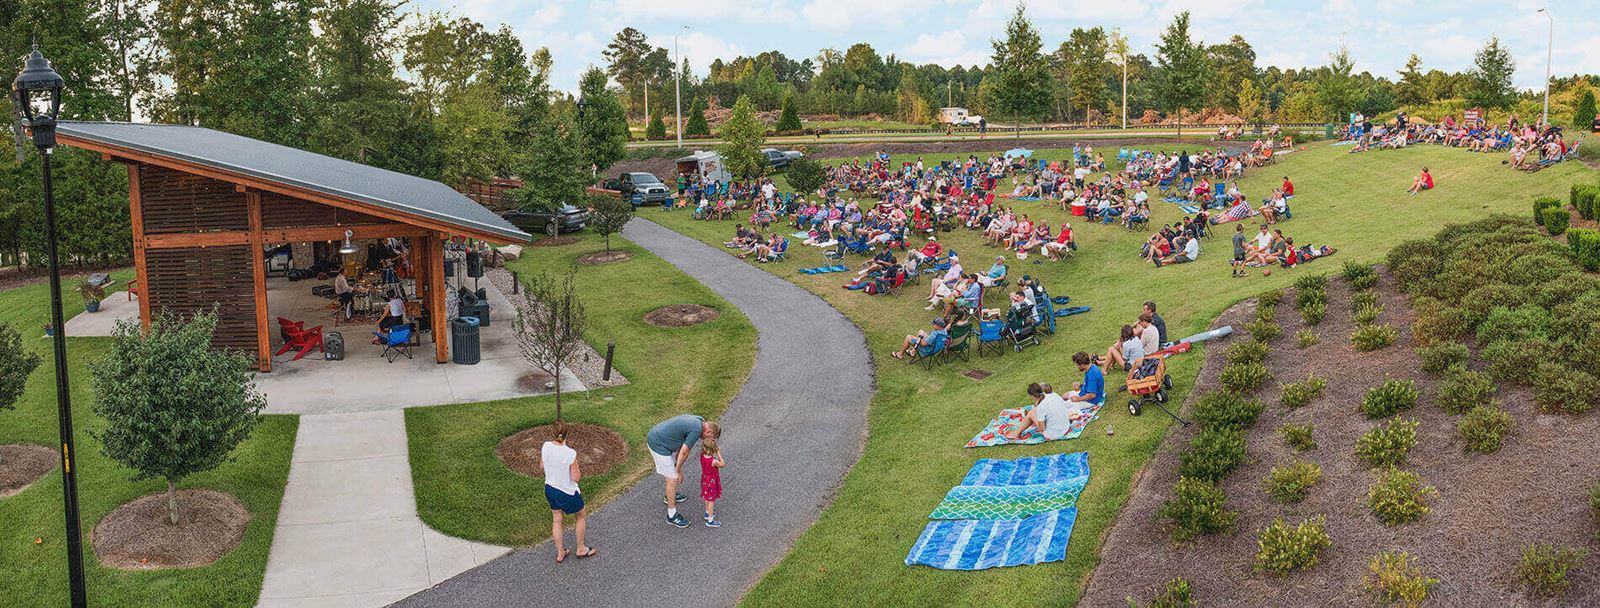 Community gathering for outdoor concert event in Wendell Falls.